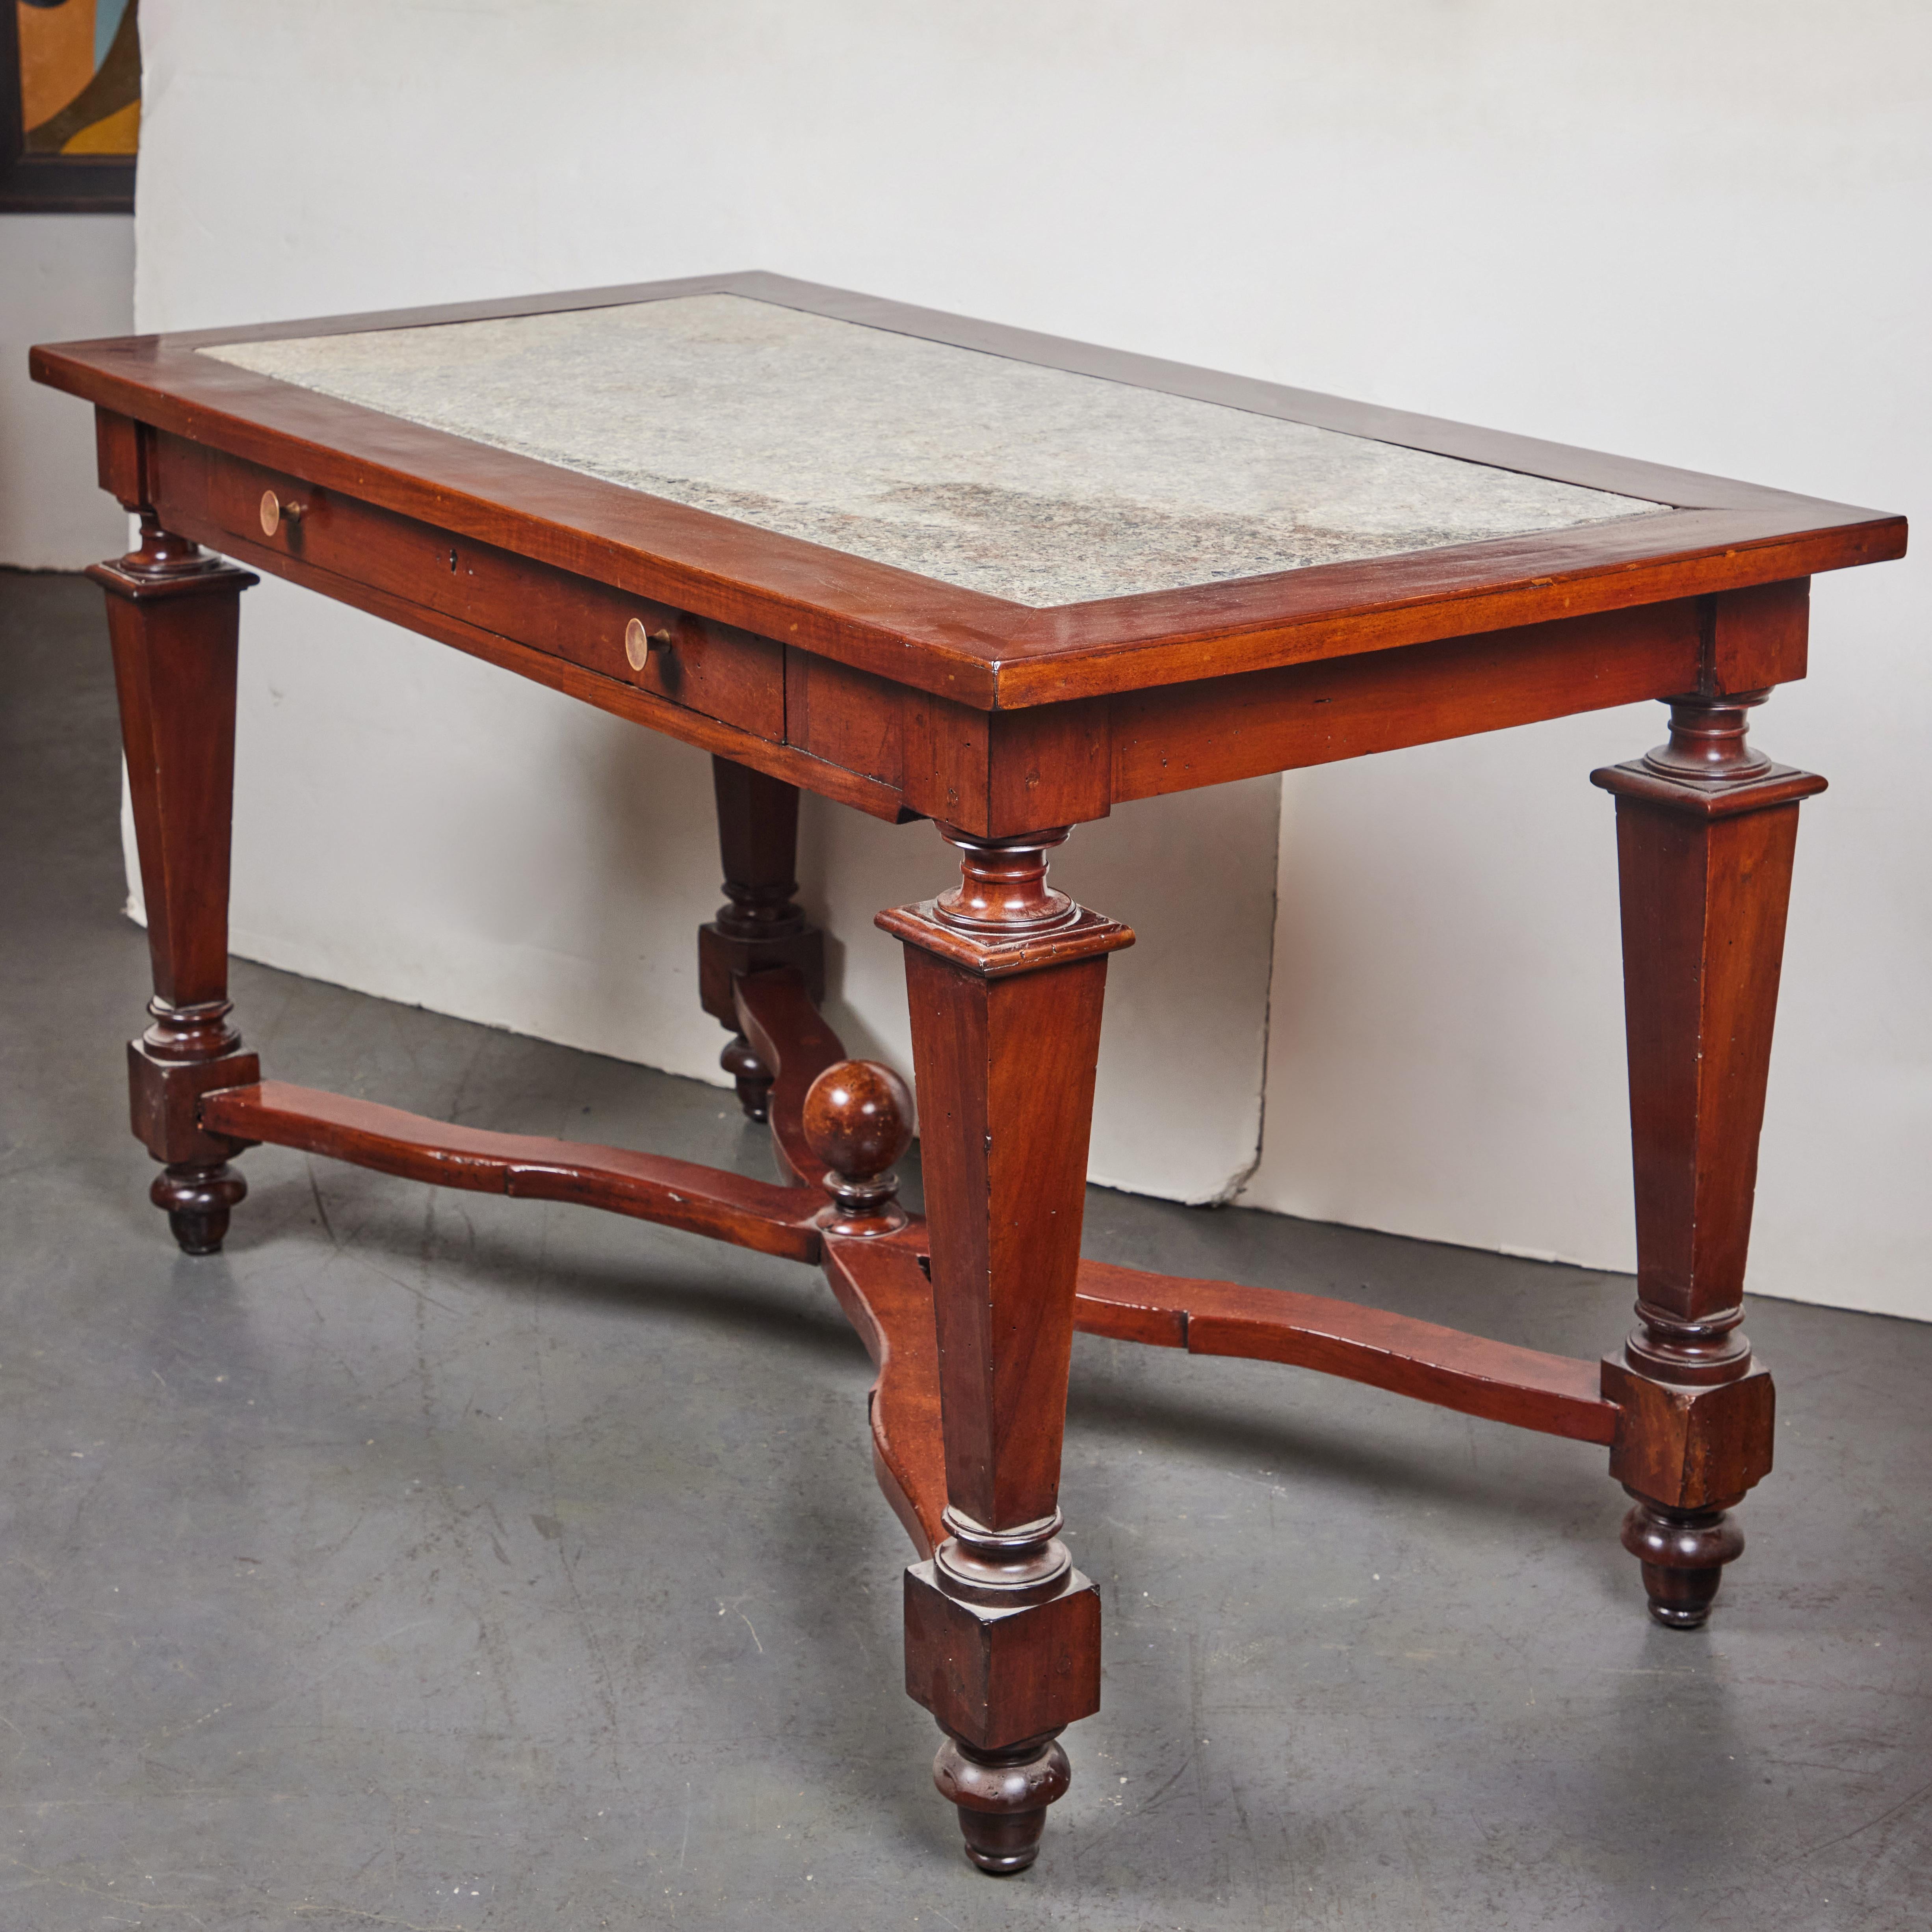 A hand-carved, solid walnut, single drawer, Tuscan console table. The top featuring it's original, marble slab sits above four tapering, turned legs and feat braced by a serpentine x-stretcher centered on a sphere finial.